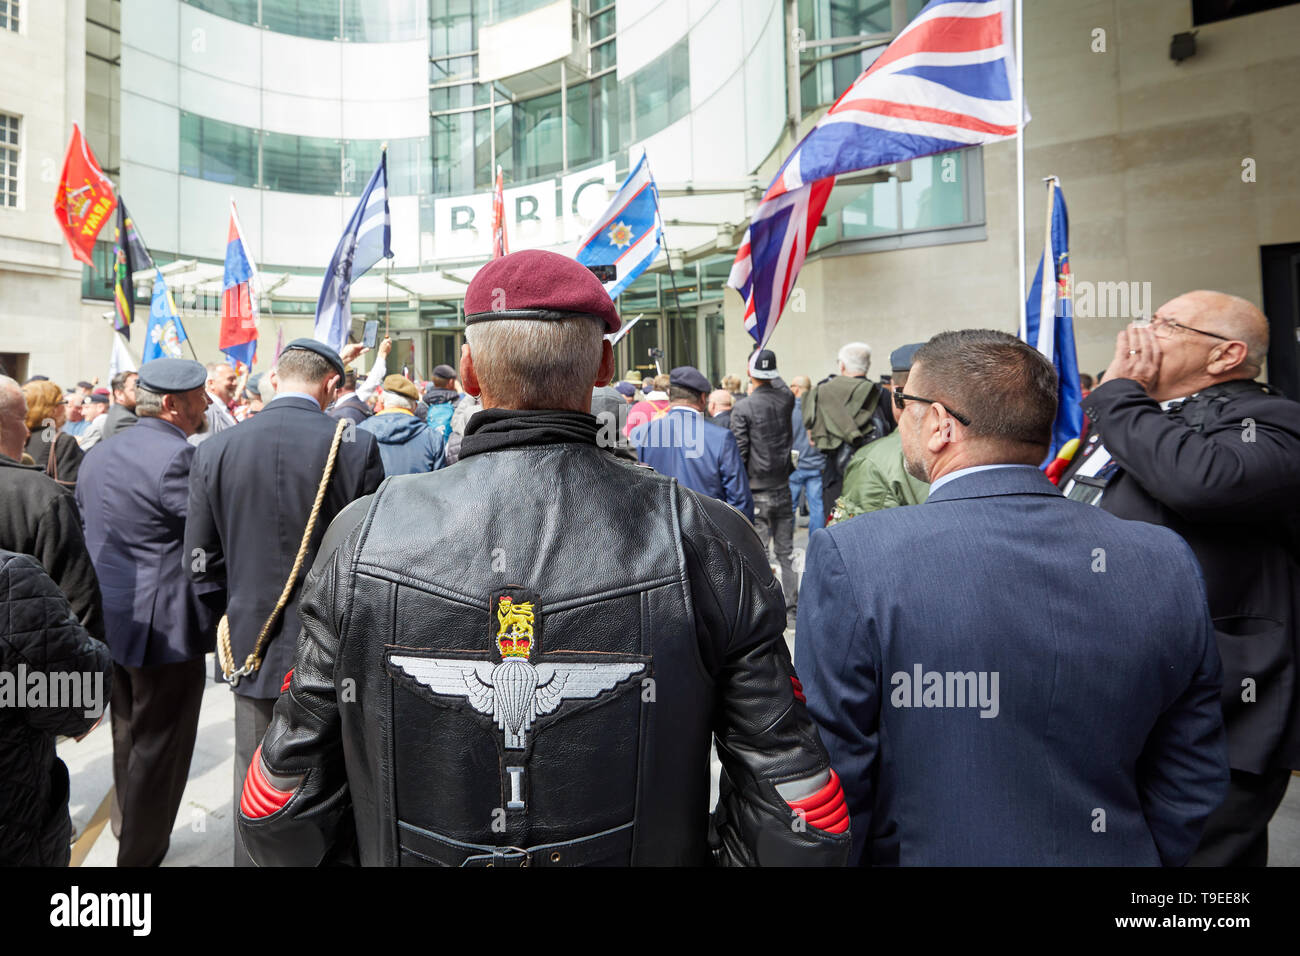 London, U.K. - 18 May, 2019: An ex-forces veteran campaigs outside the BBC as part of a protest against media bias. Stock Photo